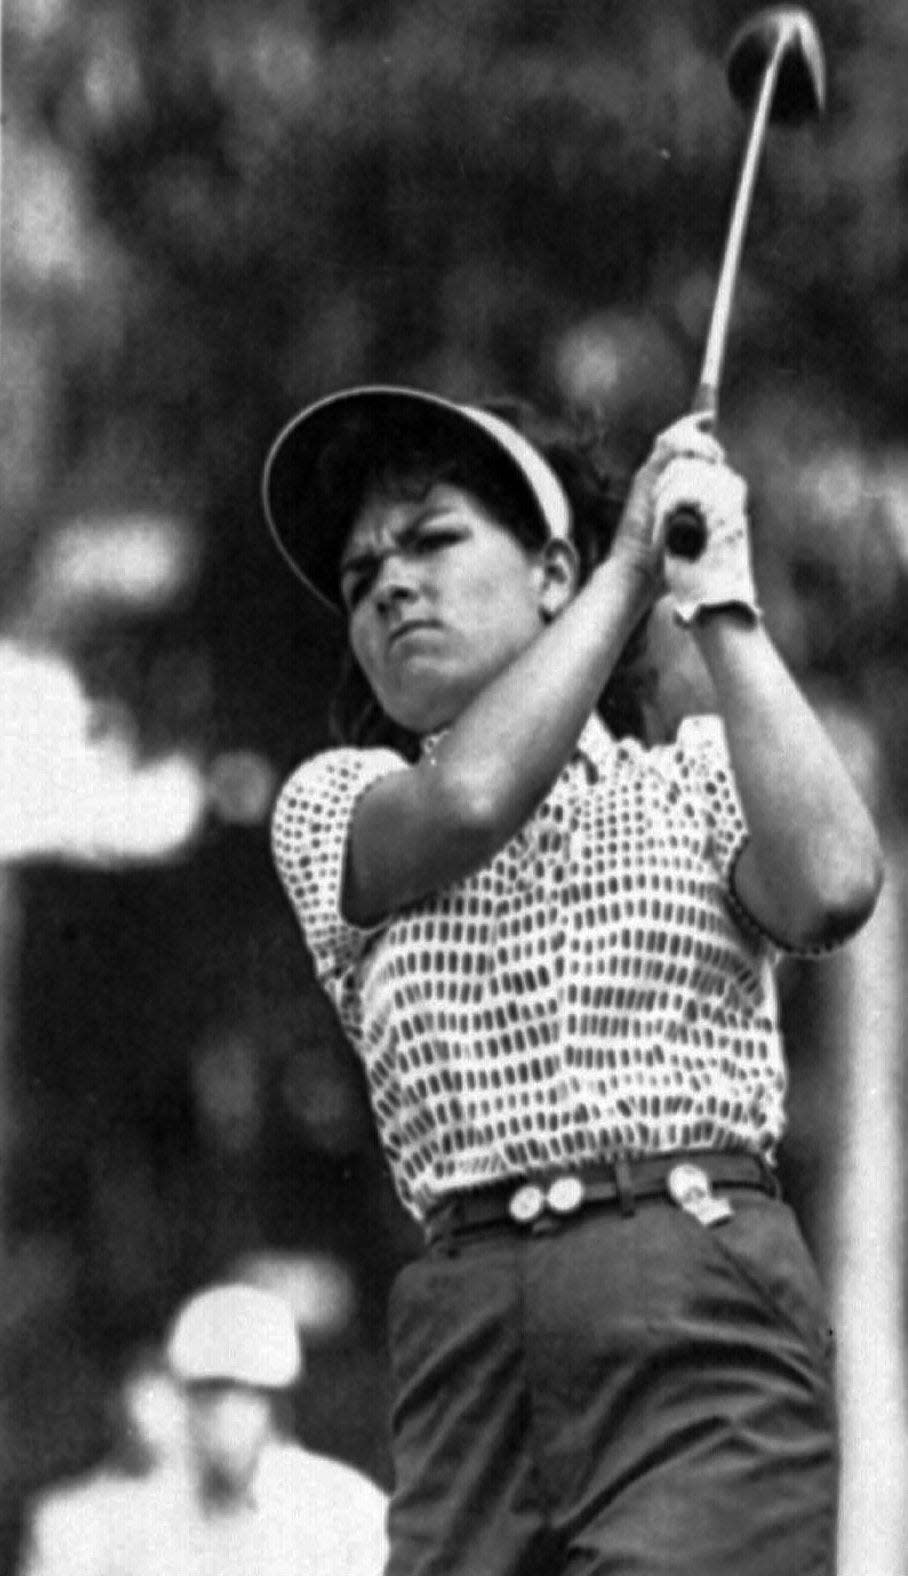 Heather Farr, an American professional golfer, was diagnosed with breast cancer in July 1989 and died after 4 years’ cancer fight in 1993.